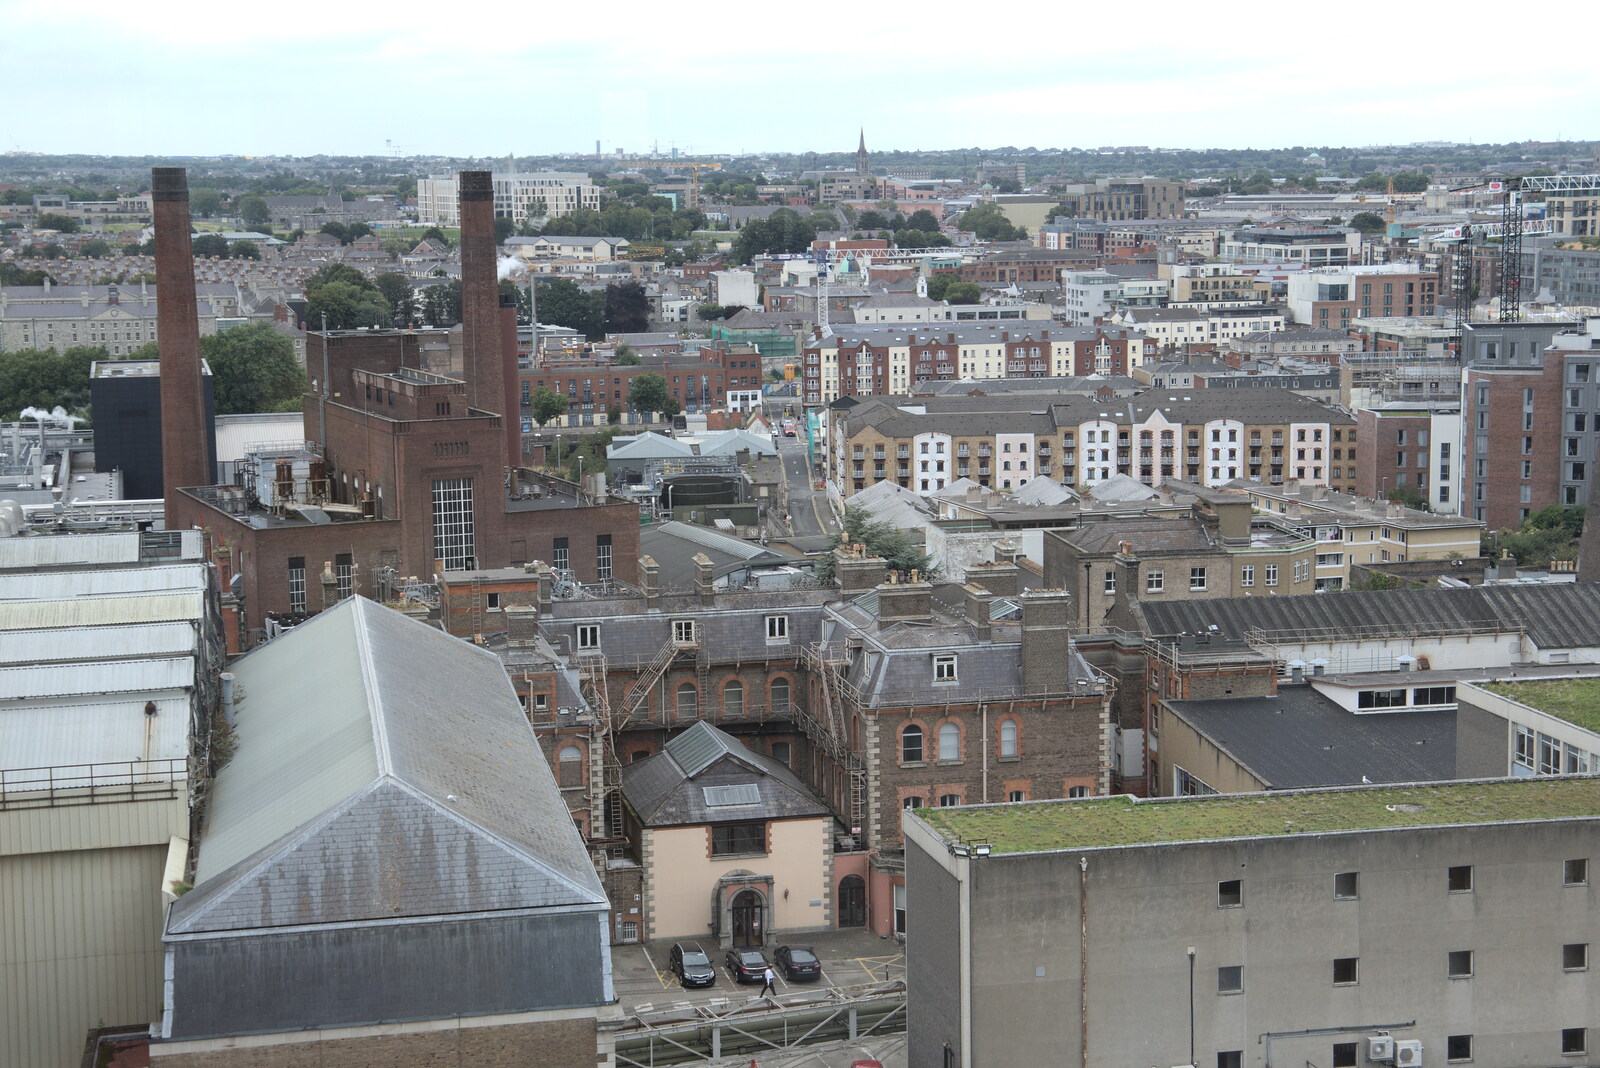 Another view of Dublin from The Guinness Storehouse Tour, St. James's Gate, Dublin, Ireland - 17th August 2021